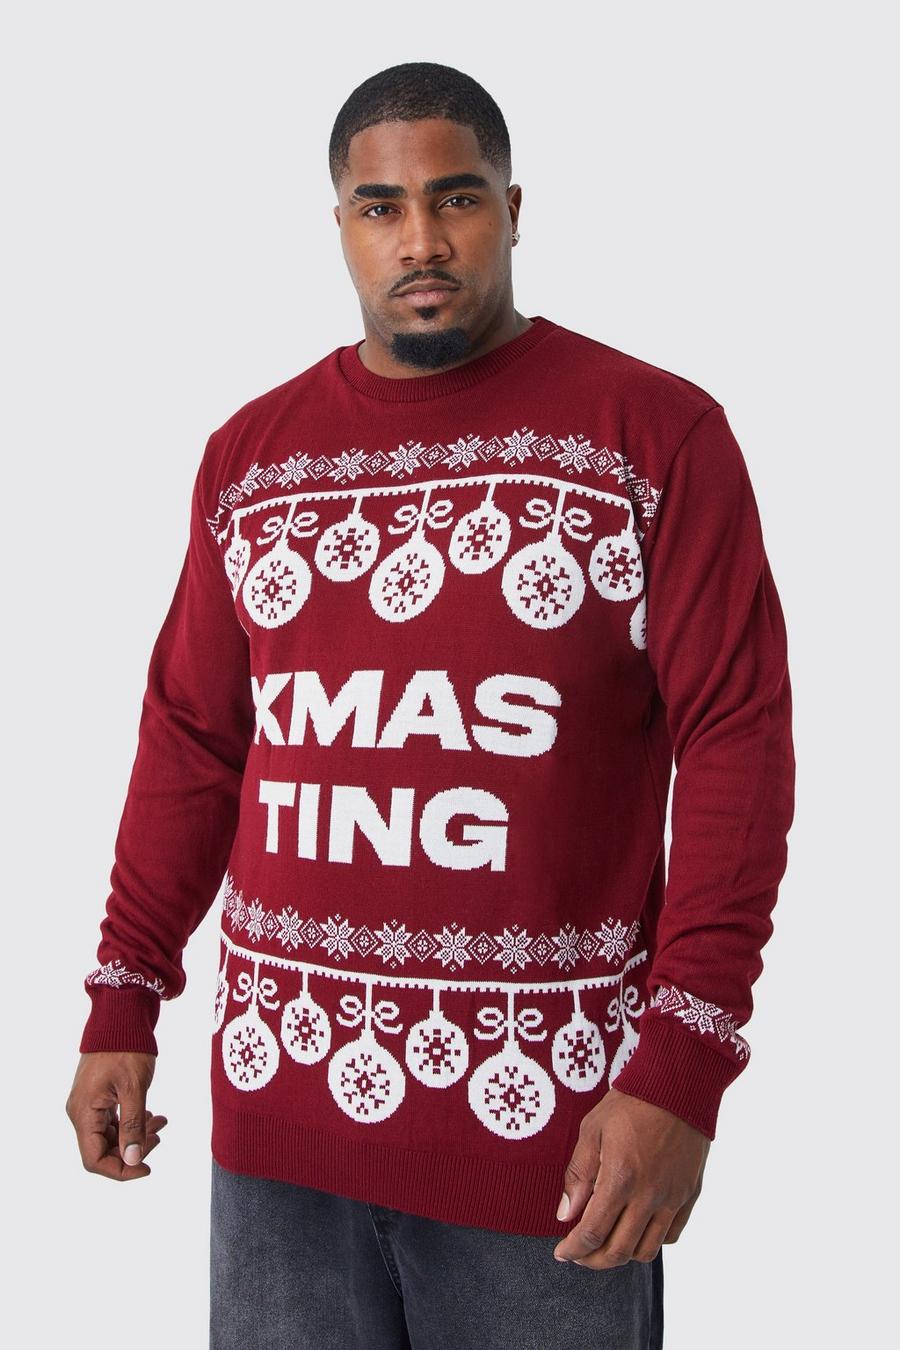 Plus Xmas Ting Weihnachtspullover, Burgundy red